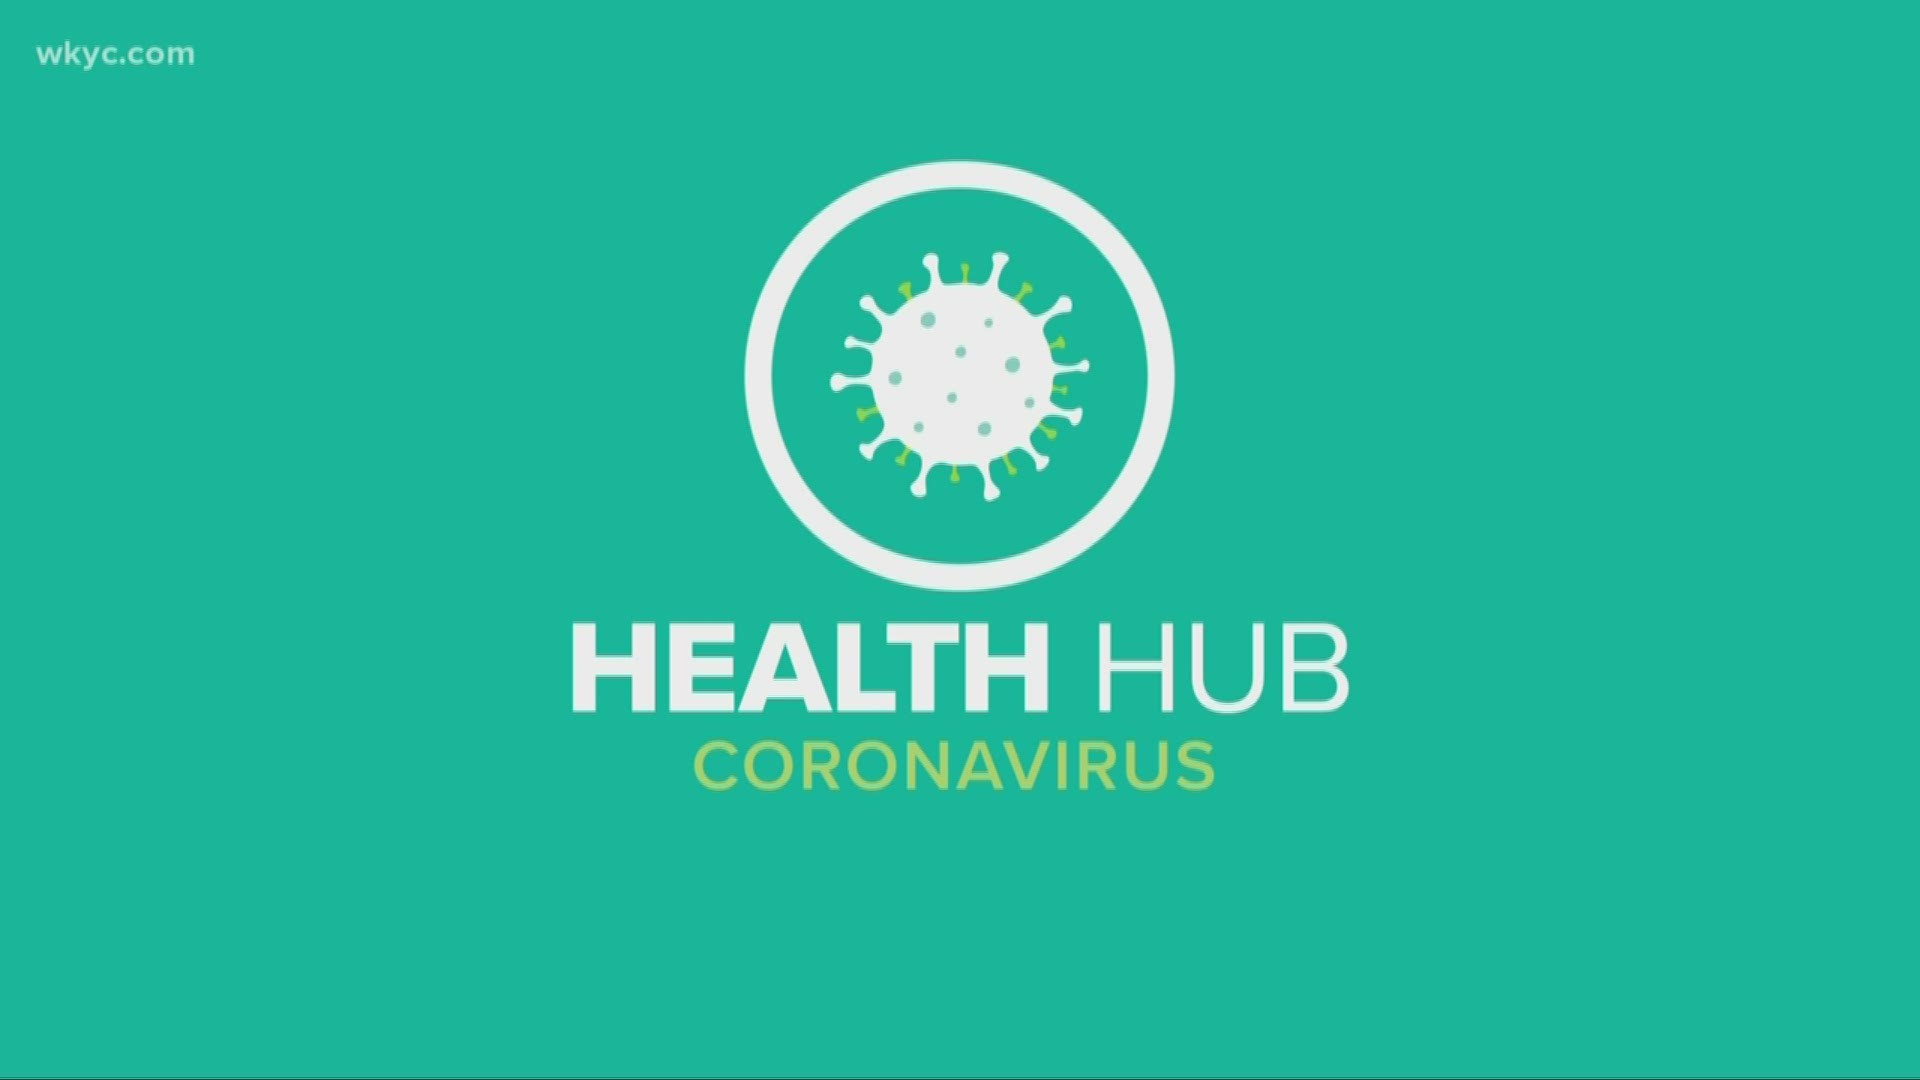 We have received hundreds of questions about the Coronavirus.  Dr. Shanu Agarwal, from Summa Health, has the answers.